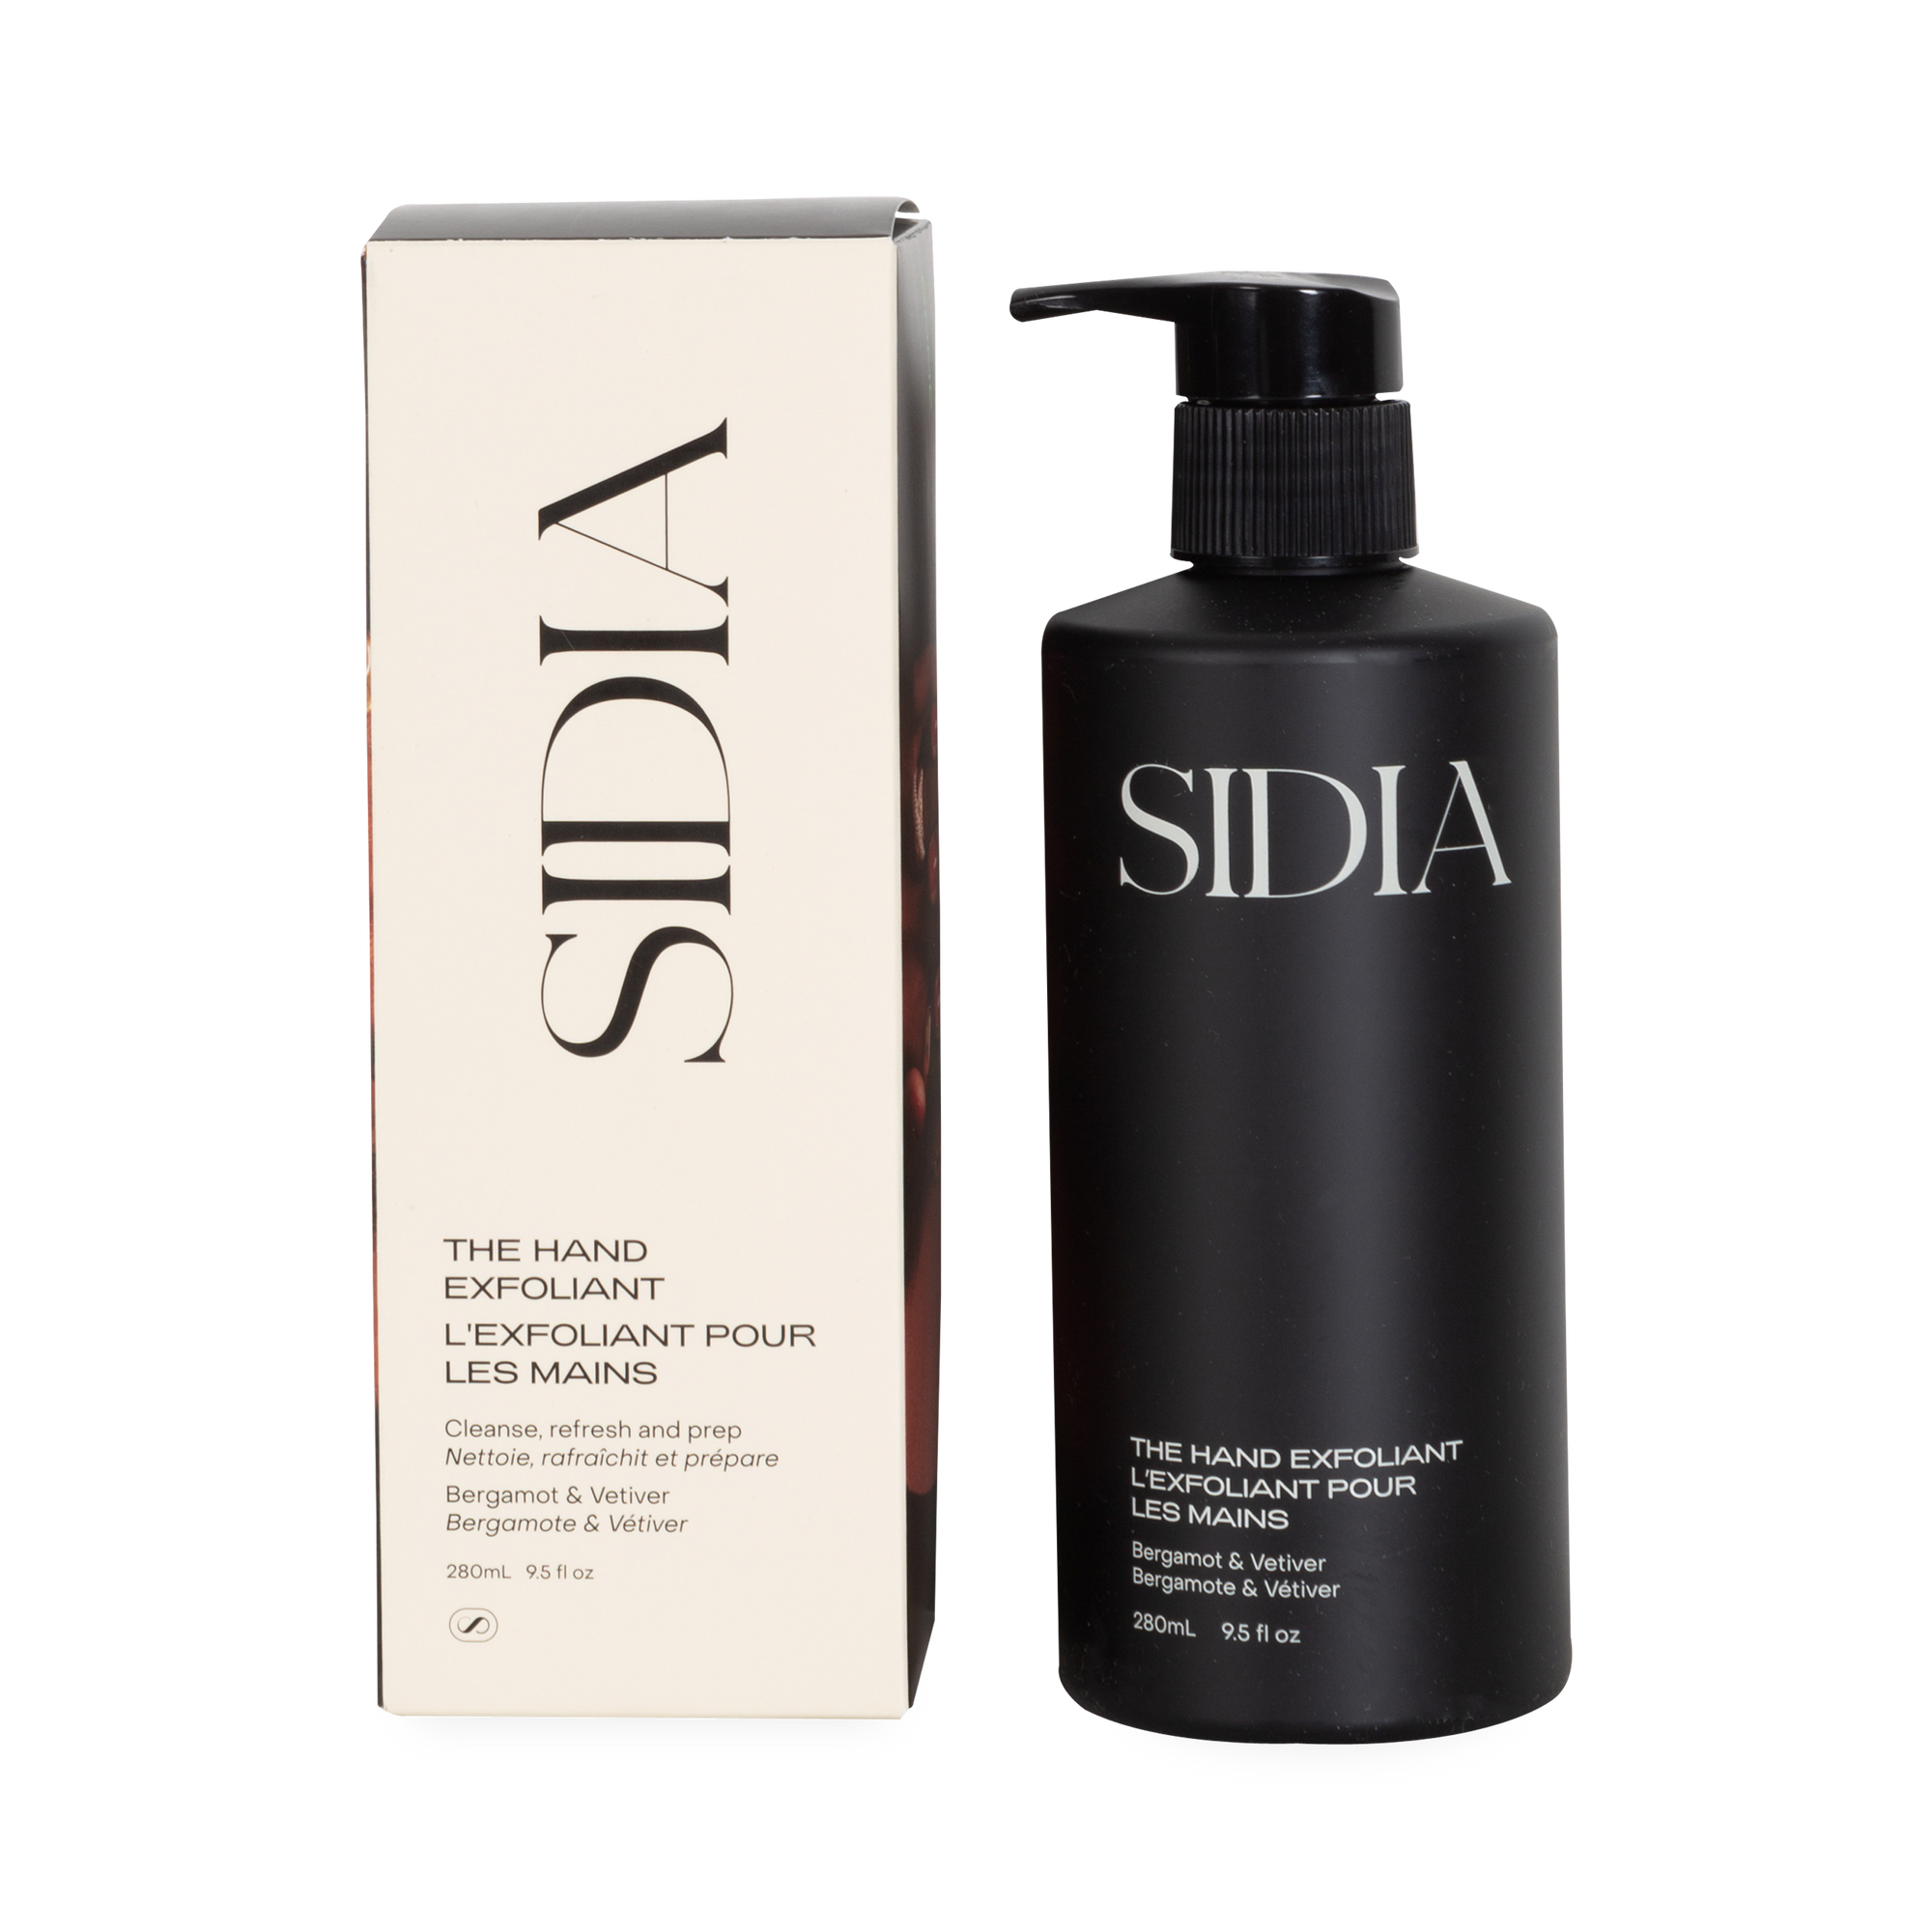 This hand exfoliant from Sidia is infused with perlite to soften, rambutan to smooth fine lines and avocado oil to nourish and prep for fast-absorbing hydration.